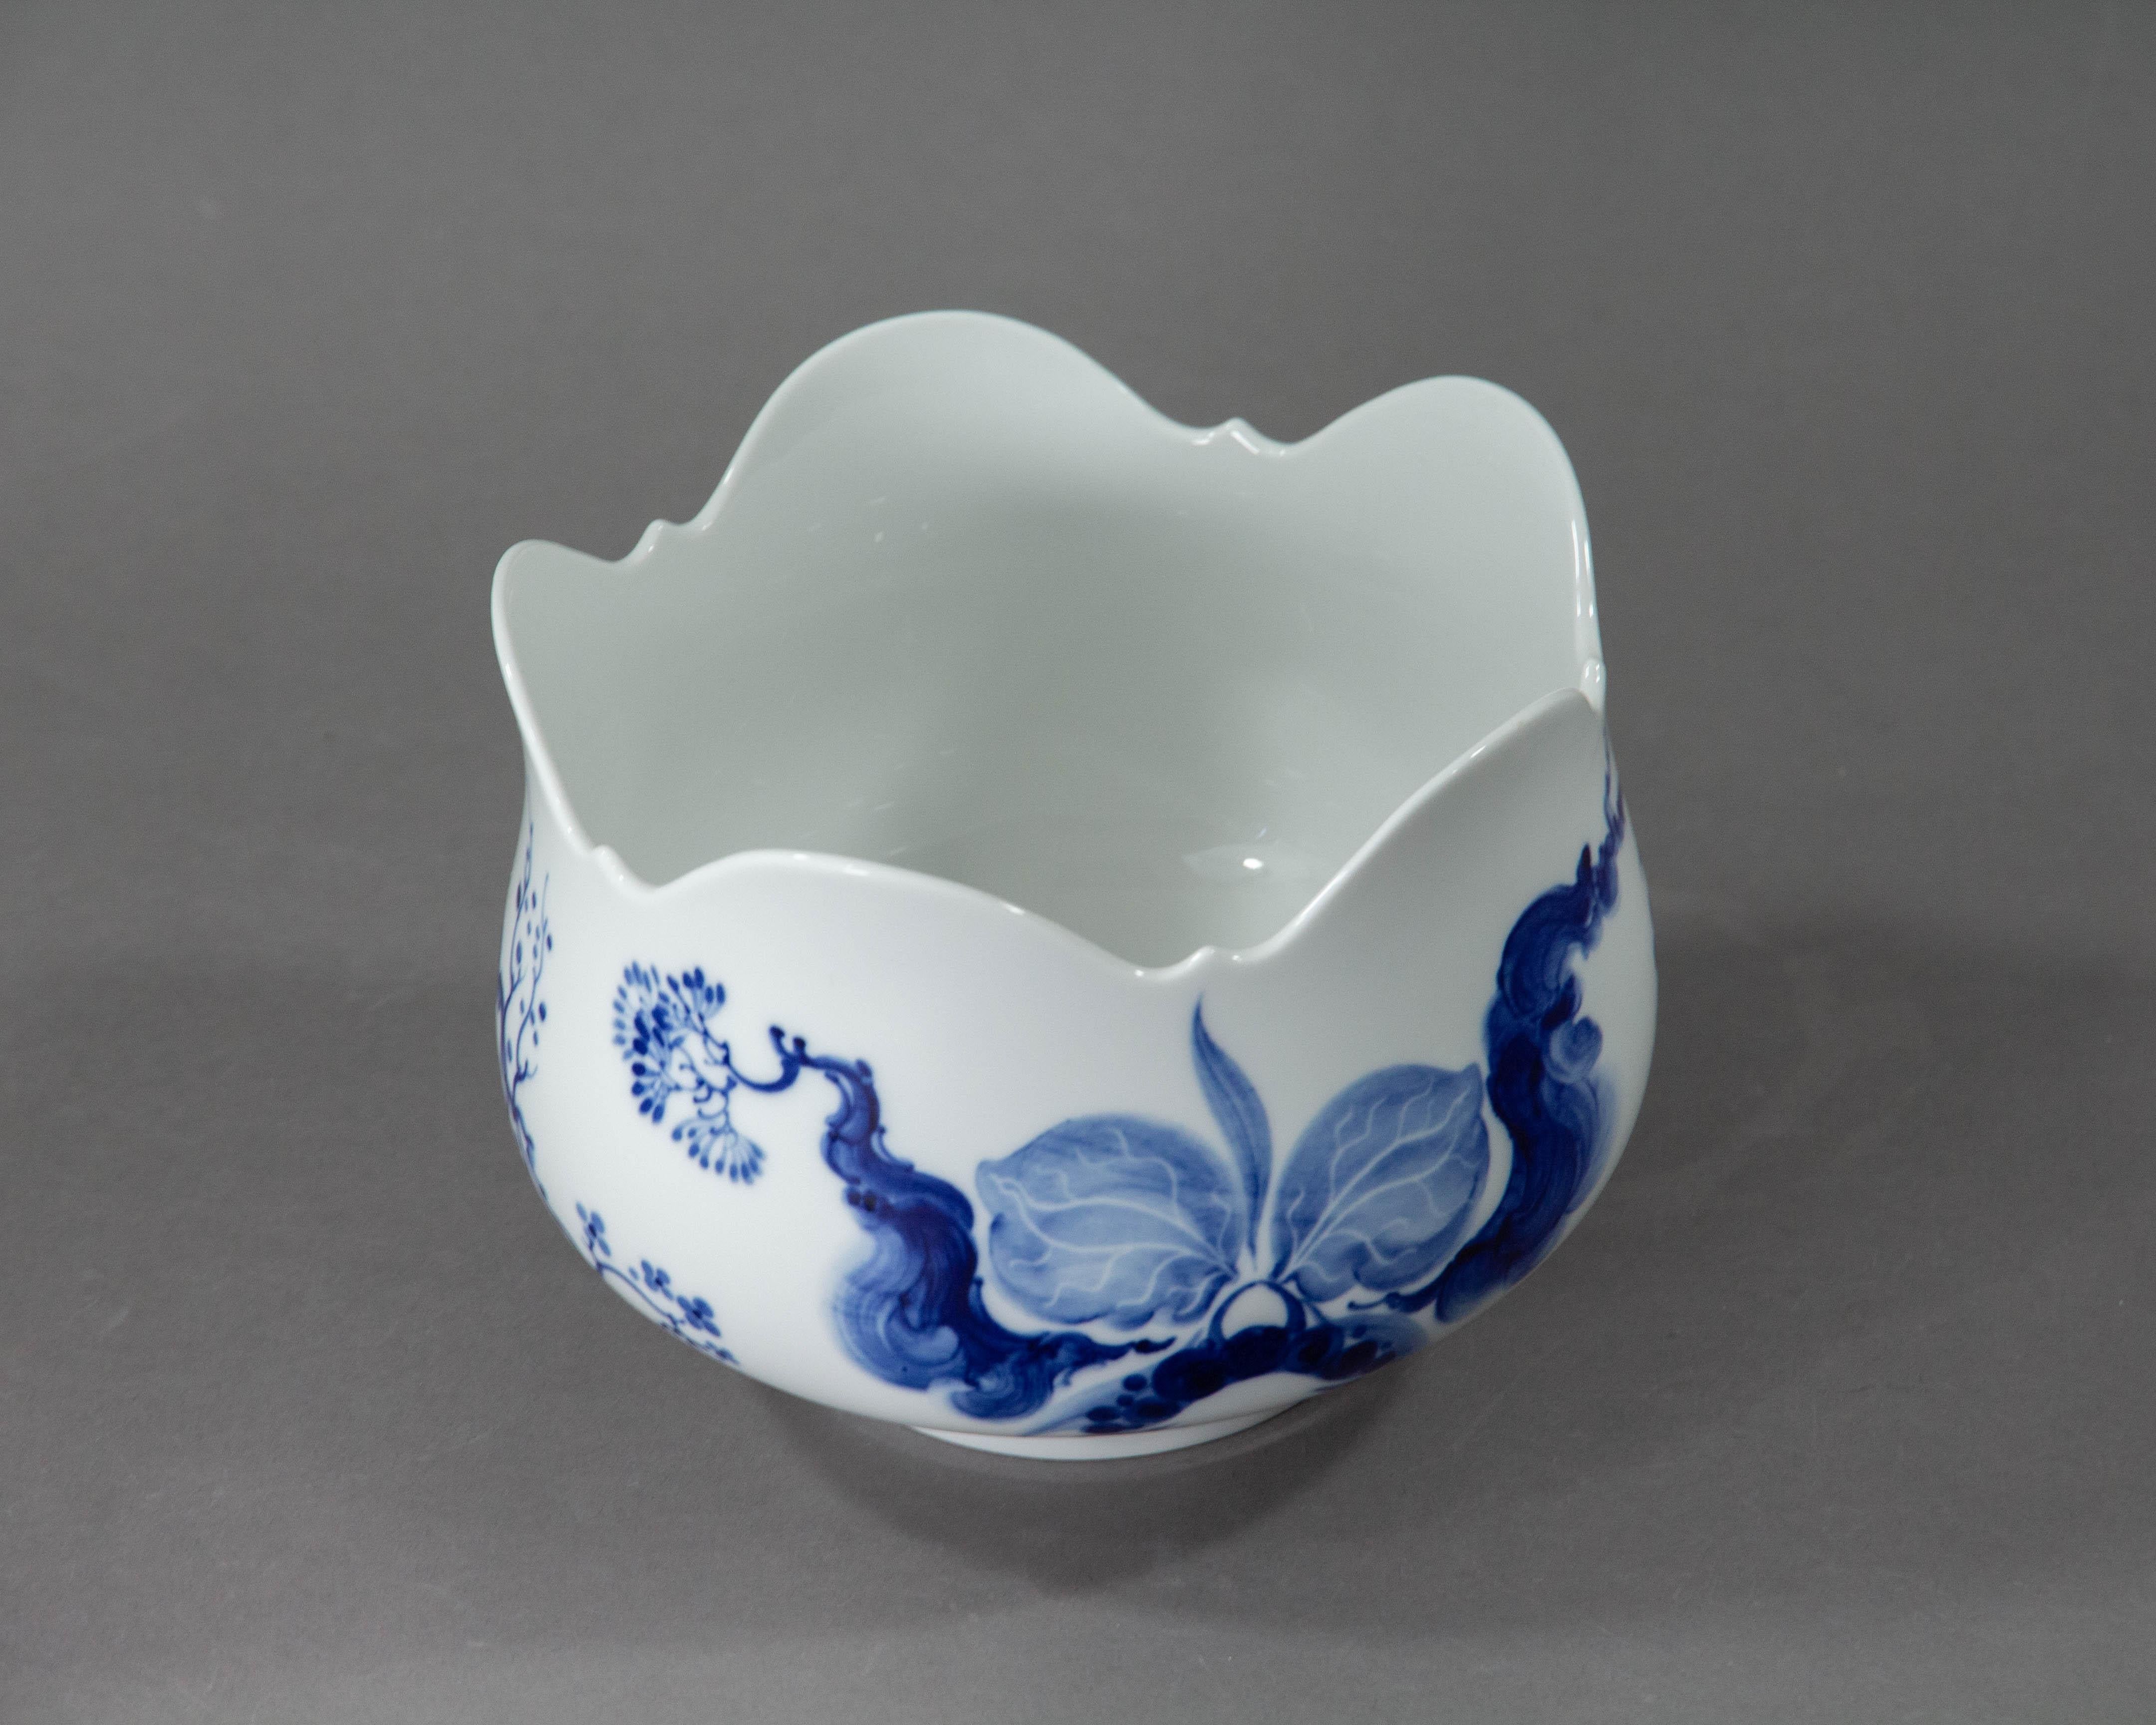 A stunning and rare serving bowl made by Meissen made in the second half of the 20th century.

The bowl features Meissen's rare and very sought after 'Blue Orchid' Pattern. The pattern is considered one of the most iconic recent additions to